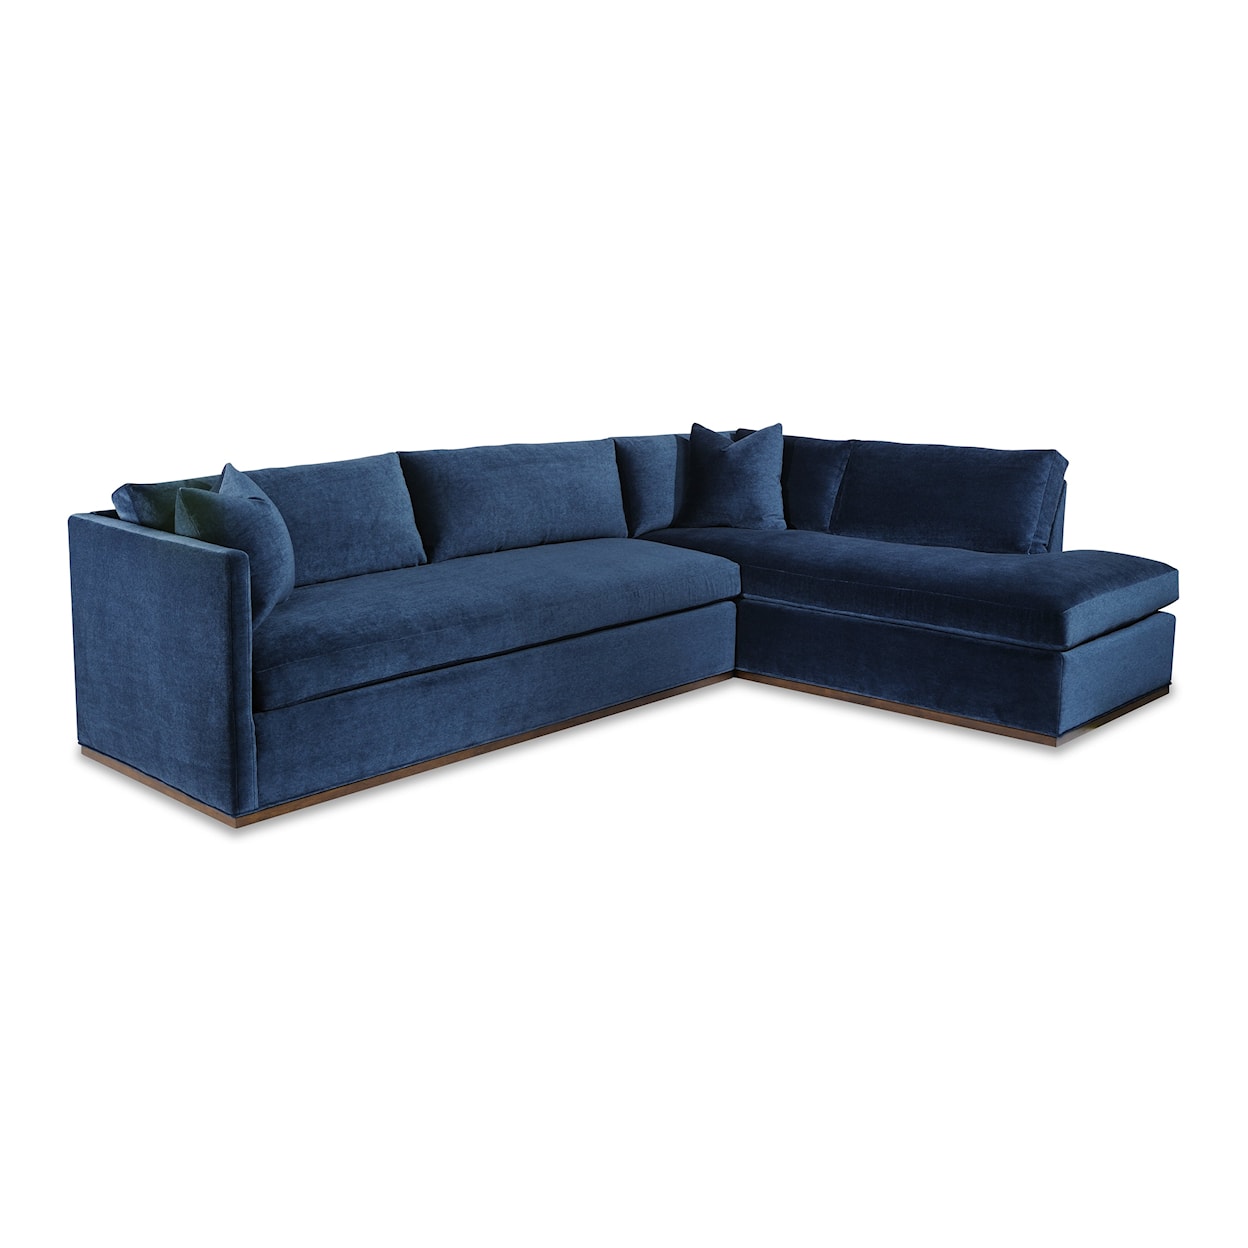 Taylor King Sectionals ADELLE 2 PIECE SECTIONAL